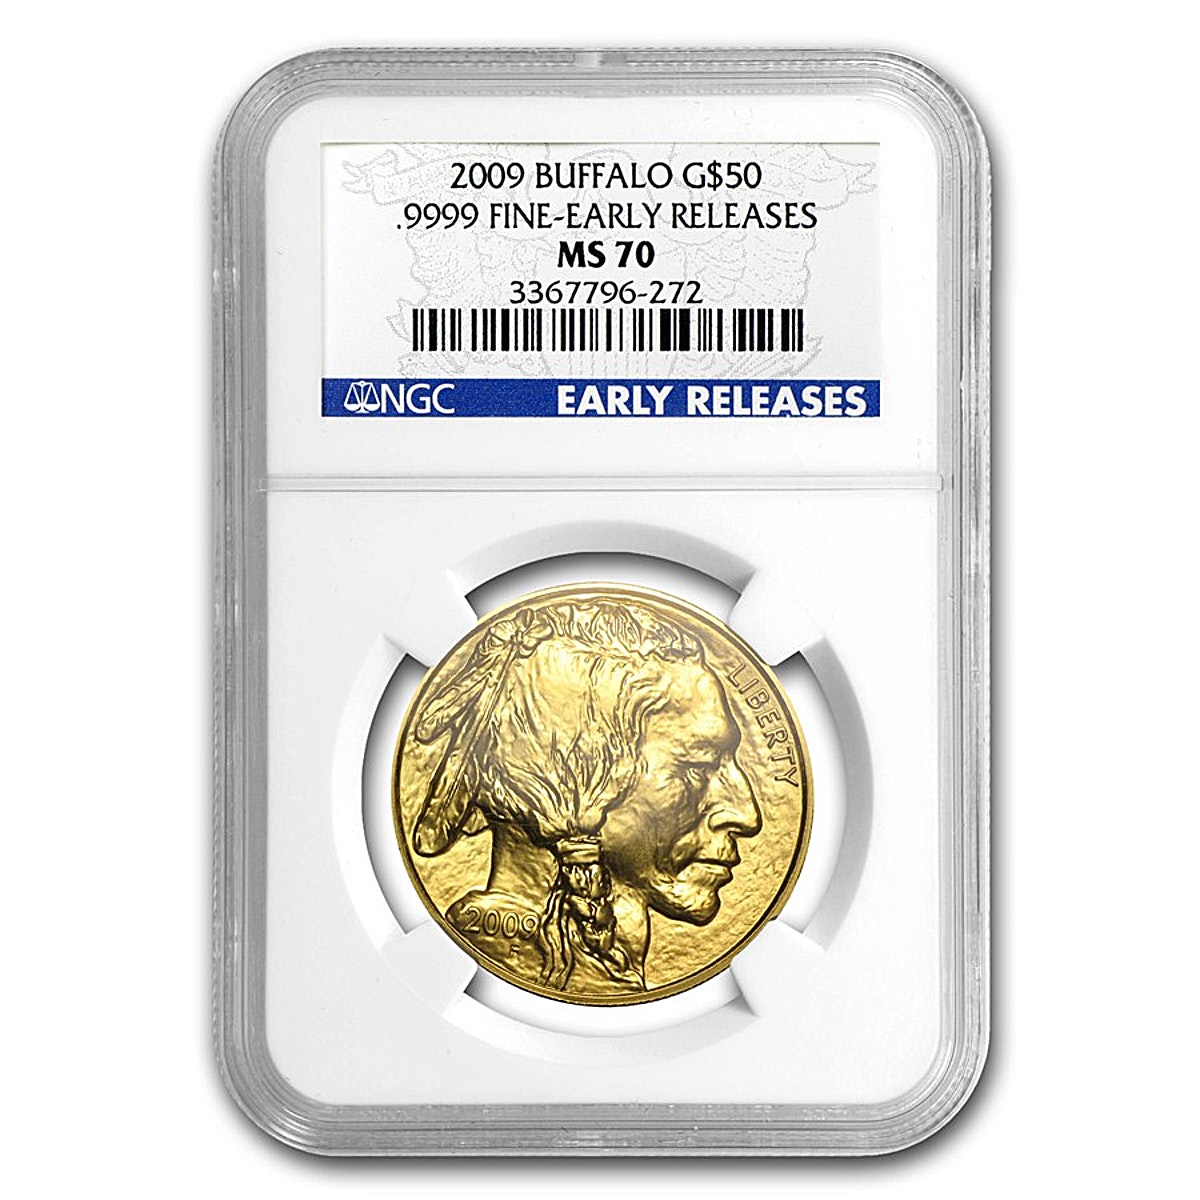 American Gold Buffalo 2009 - Early Release - Graded MS 70 by NGC - 1 oz